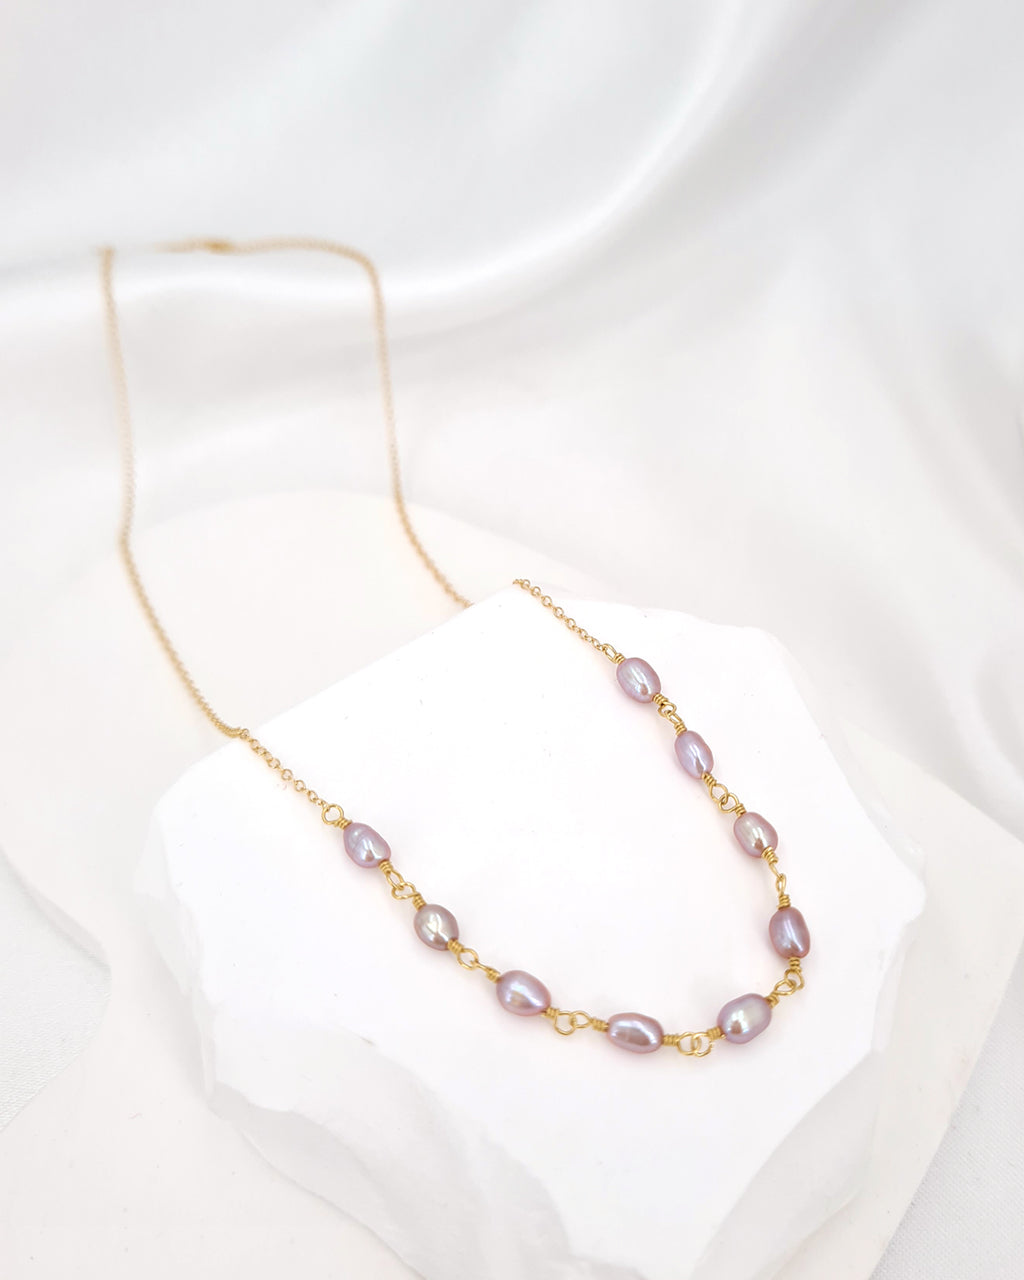 Tiny Pearl Necklace Simple Small Purple Pearl Necklace Handmade in Singapore